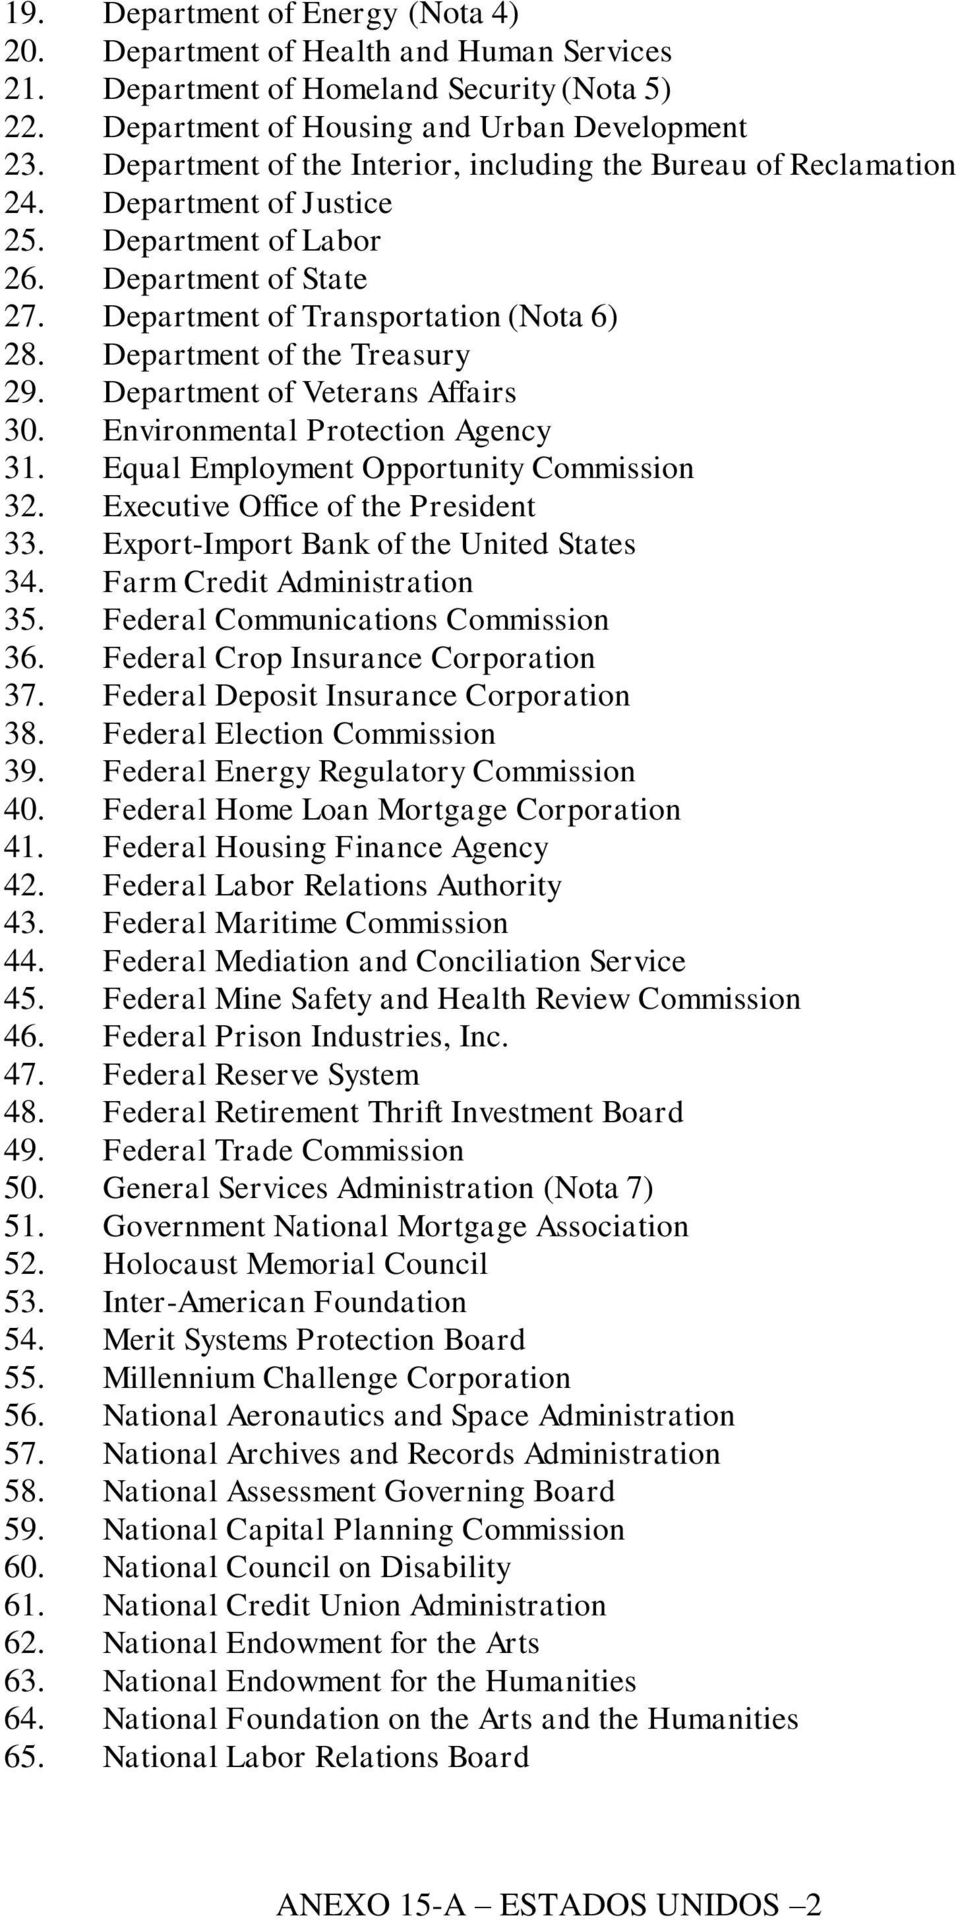 Department of the Treasury 29. Department of Veterans Affairs 30. Environmental Protection Agency 31. Equal Employment Opportunity Commission 32. Executive Office of the President 33.